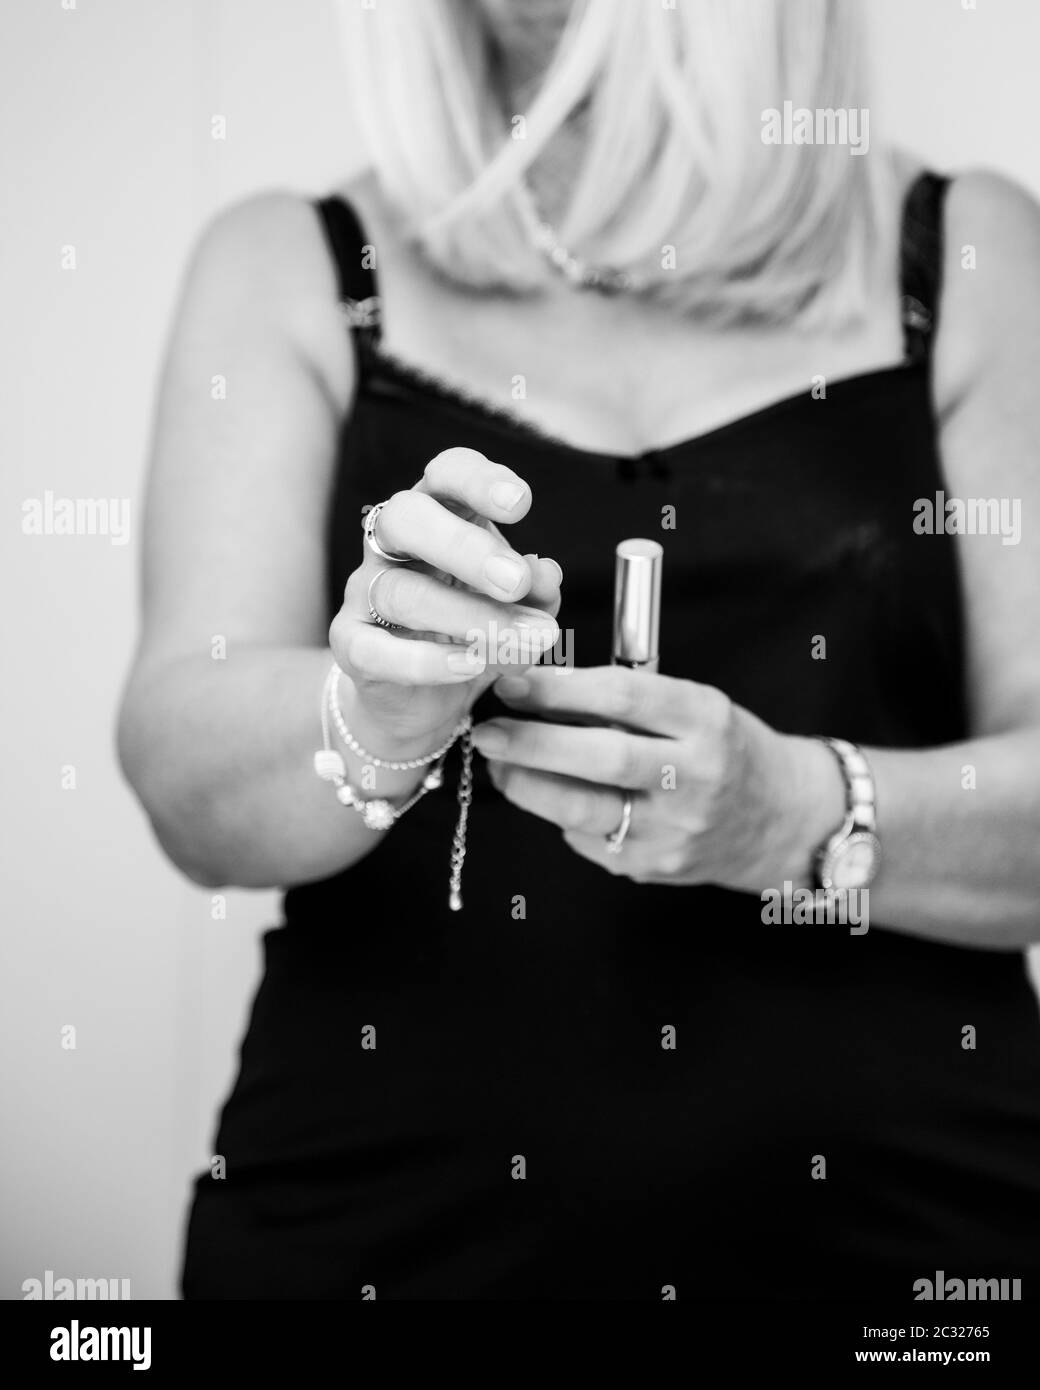 A lifestyle monochrome image of a blonde woman putting on a bracelet getting ready to go out for the evening. The image focuses on her hands. Stock Photo